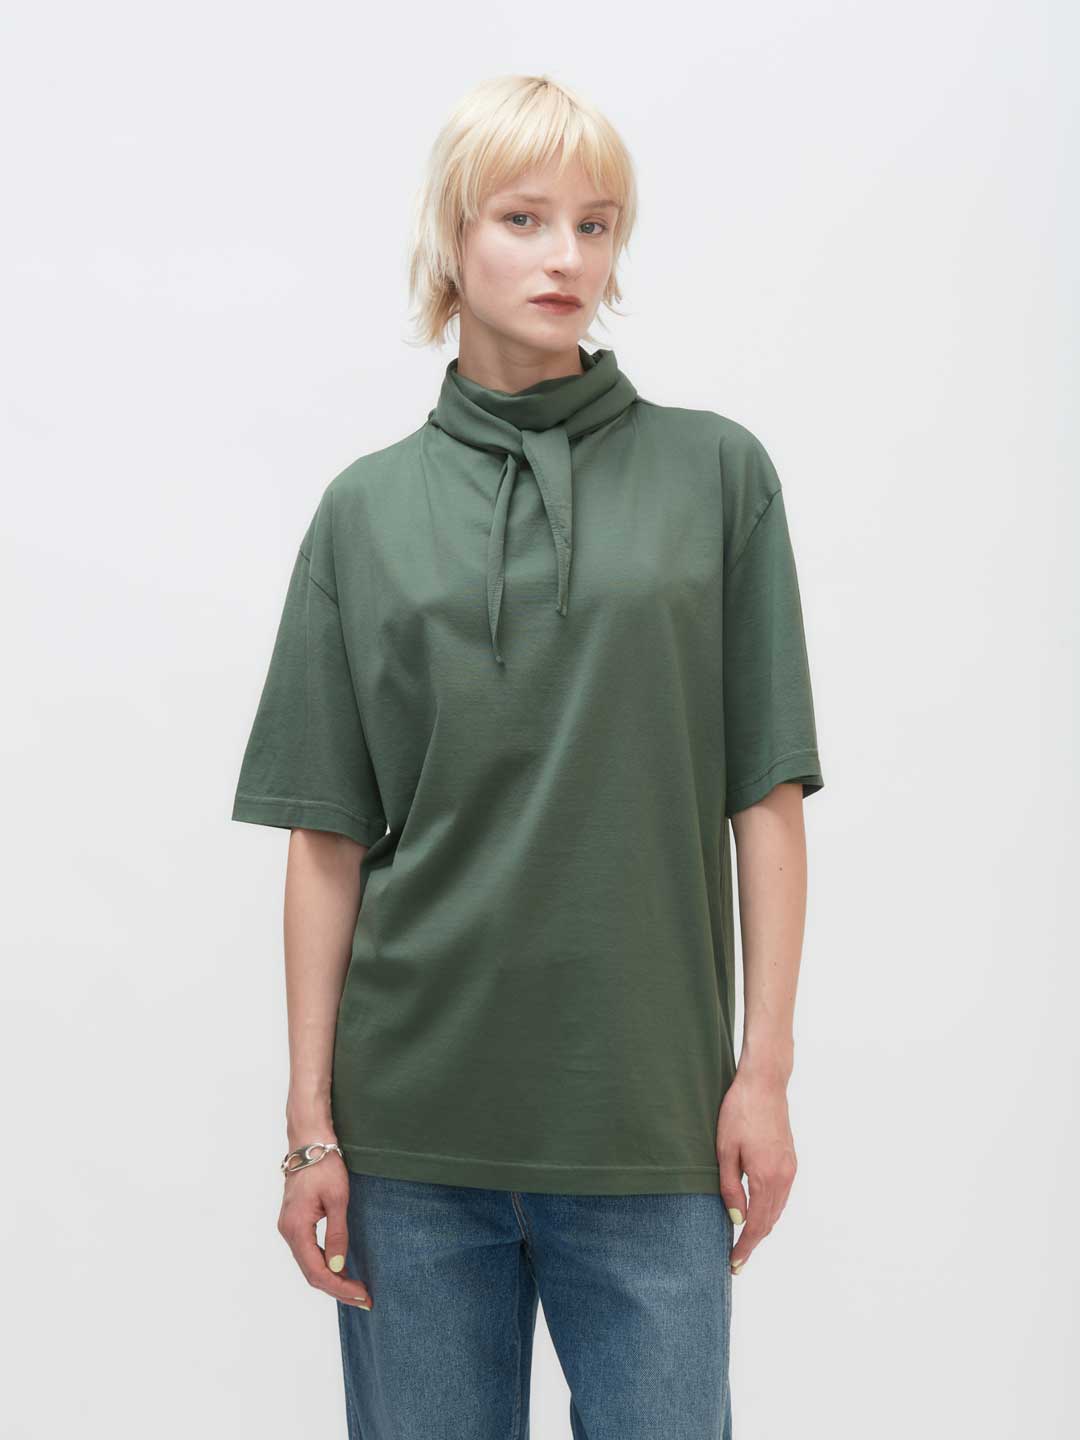 T-Shirt With Foulard - Olive